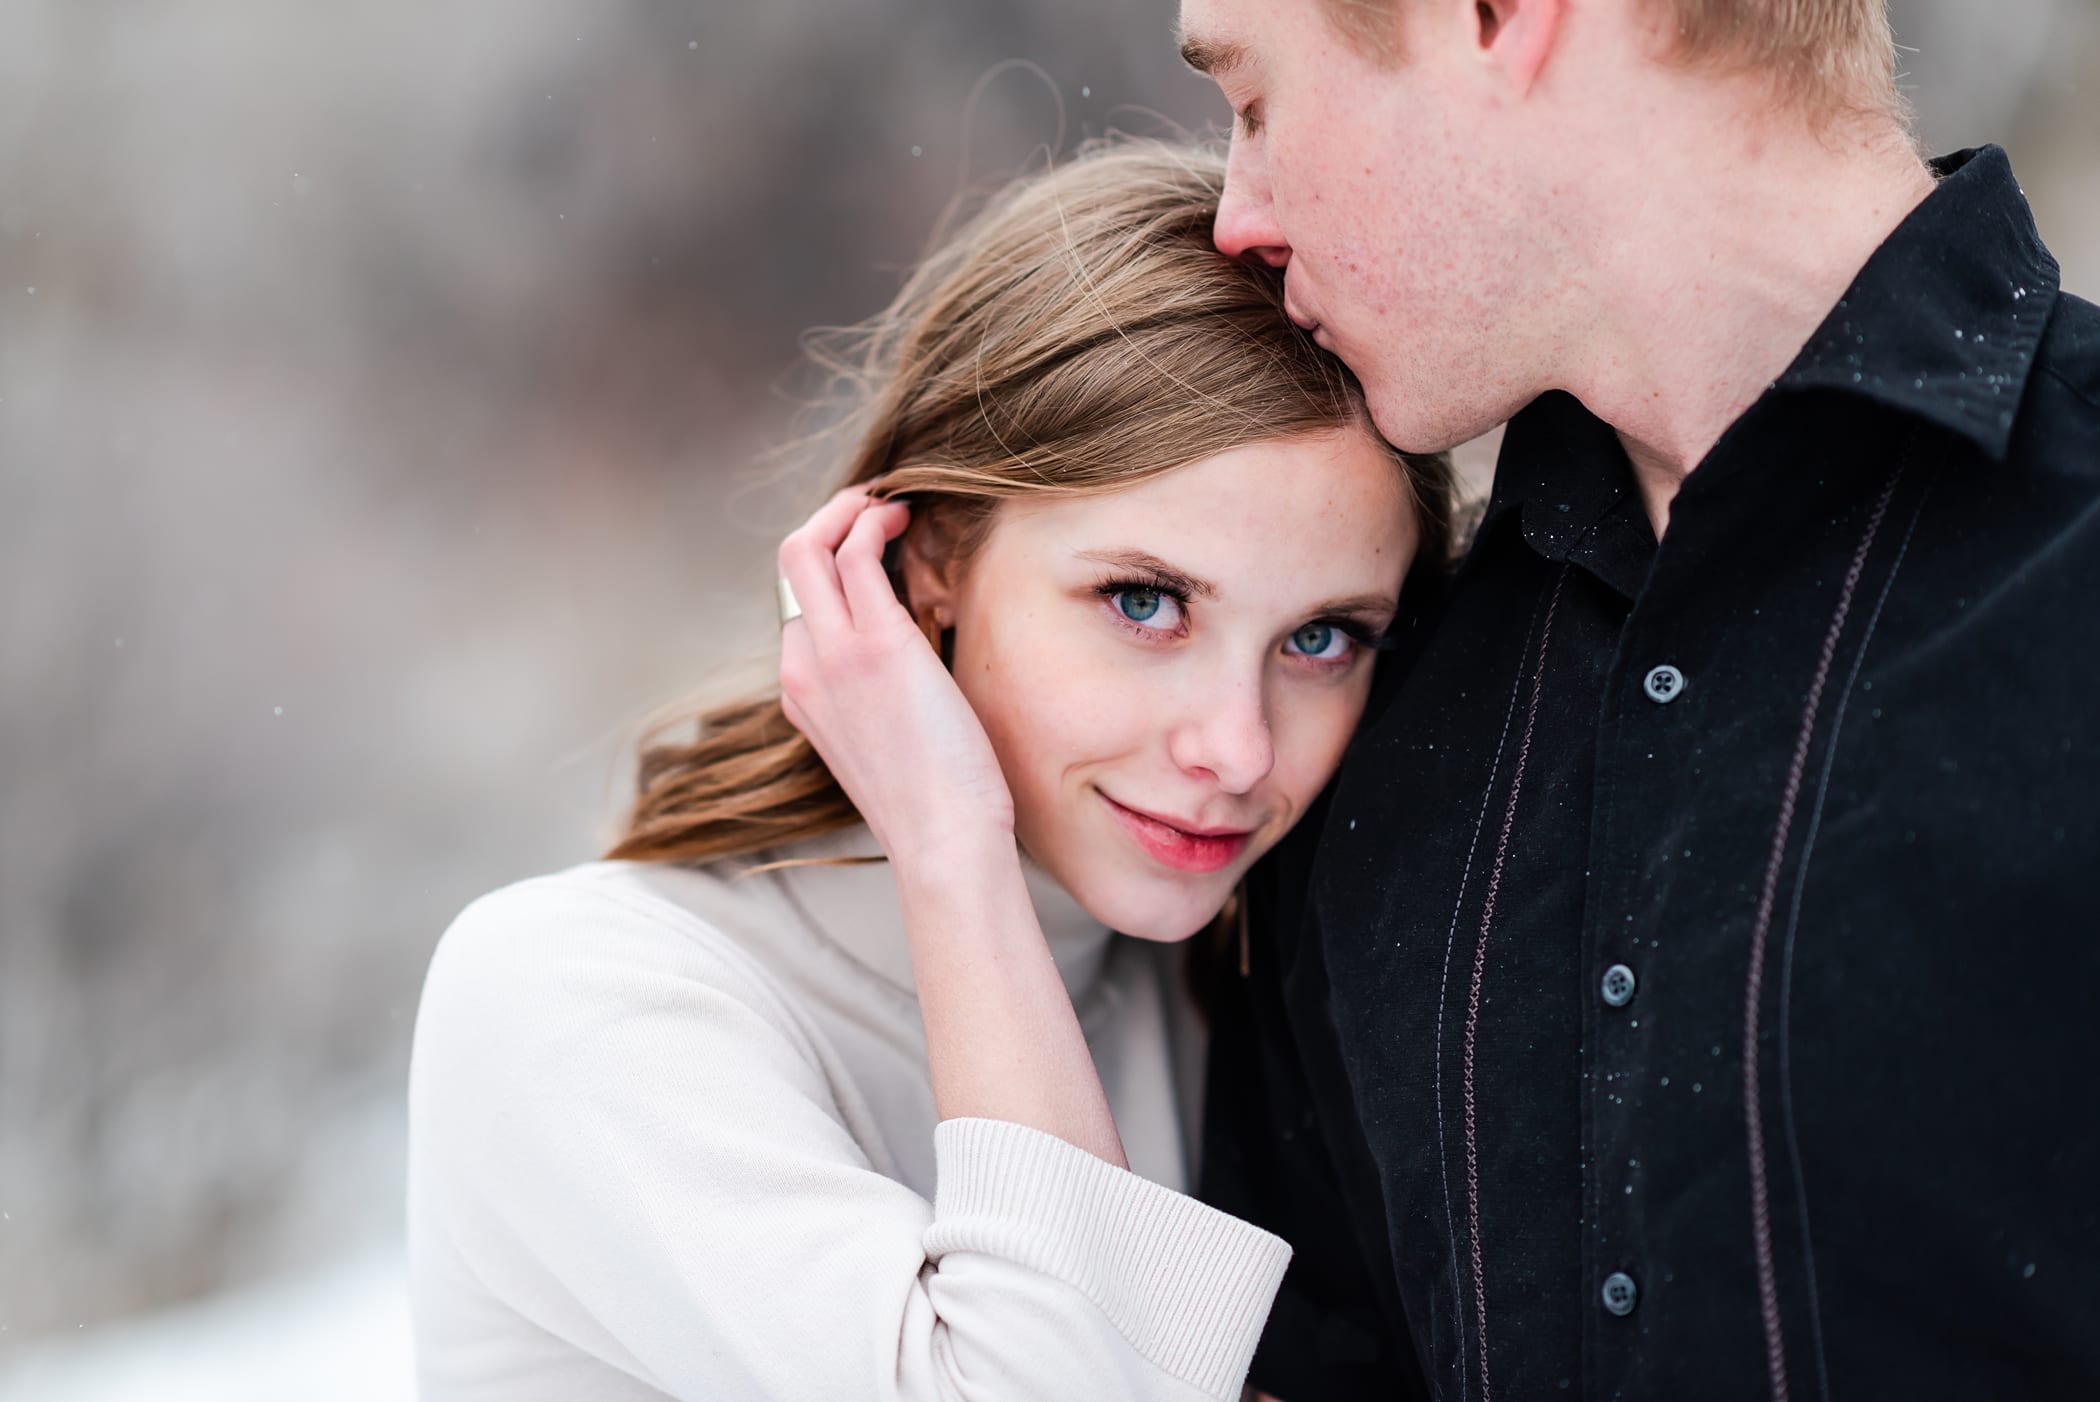 Idaho Winter Engagements by Michelle & Logan